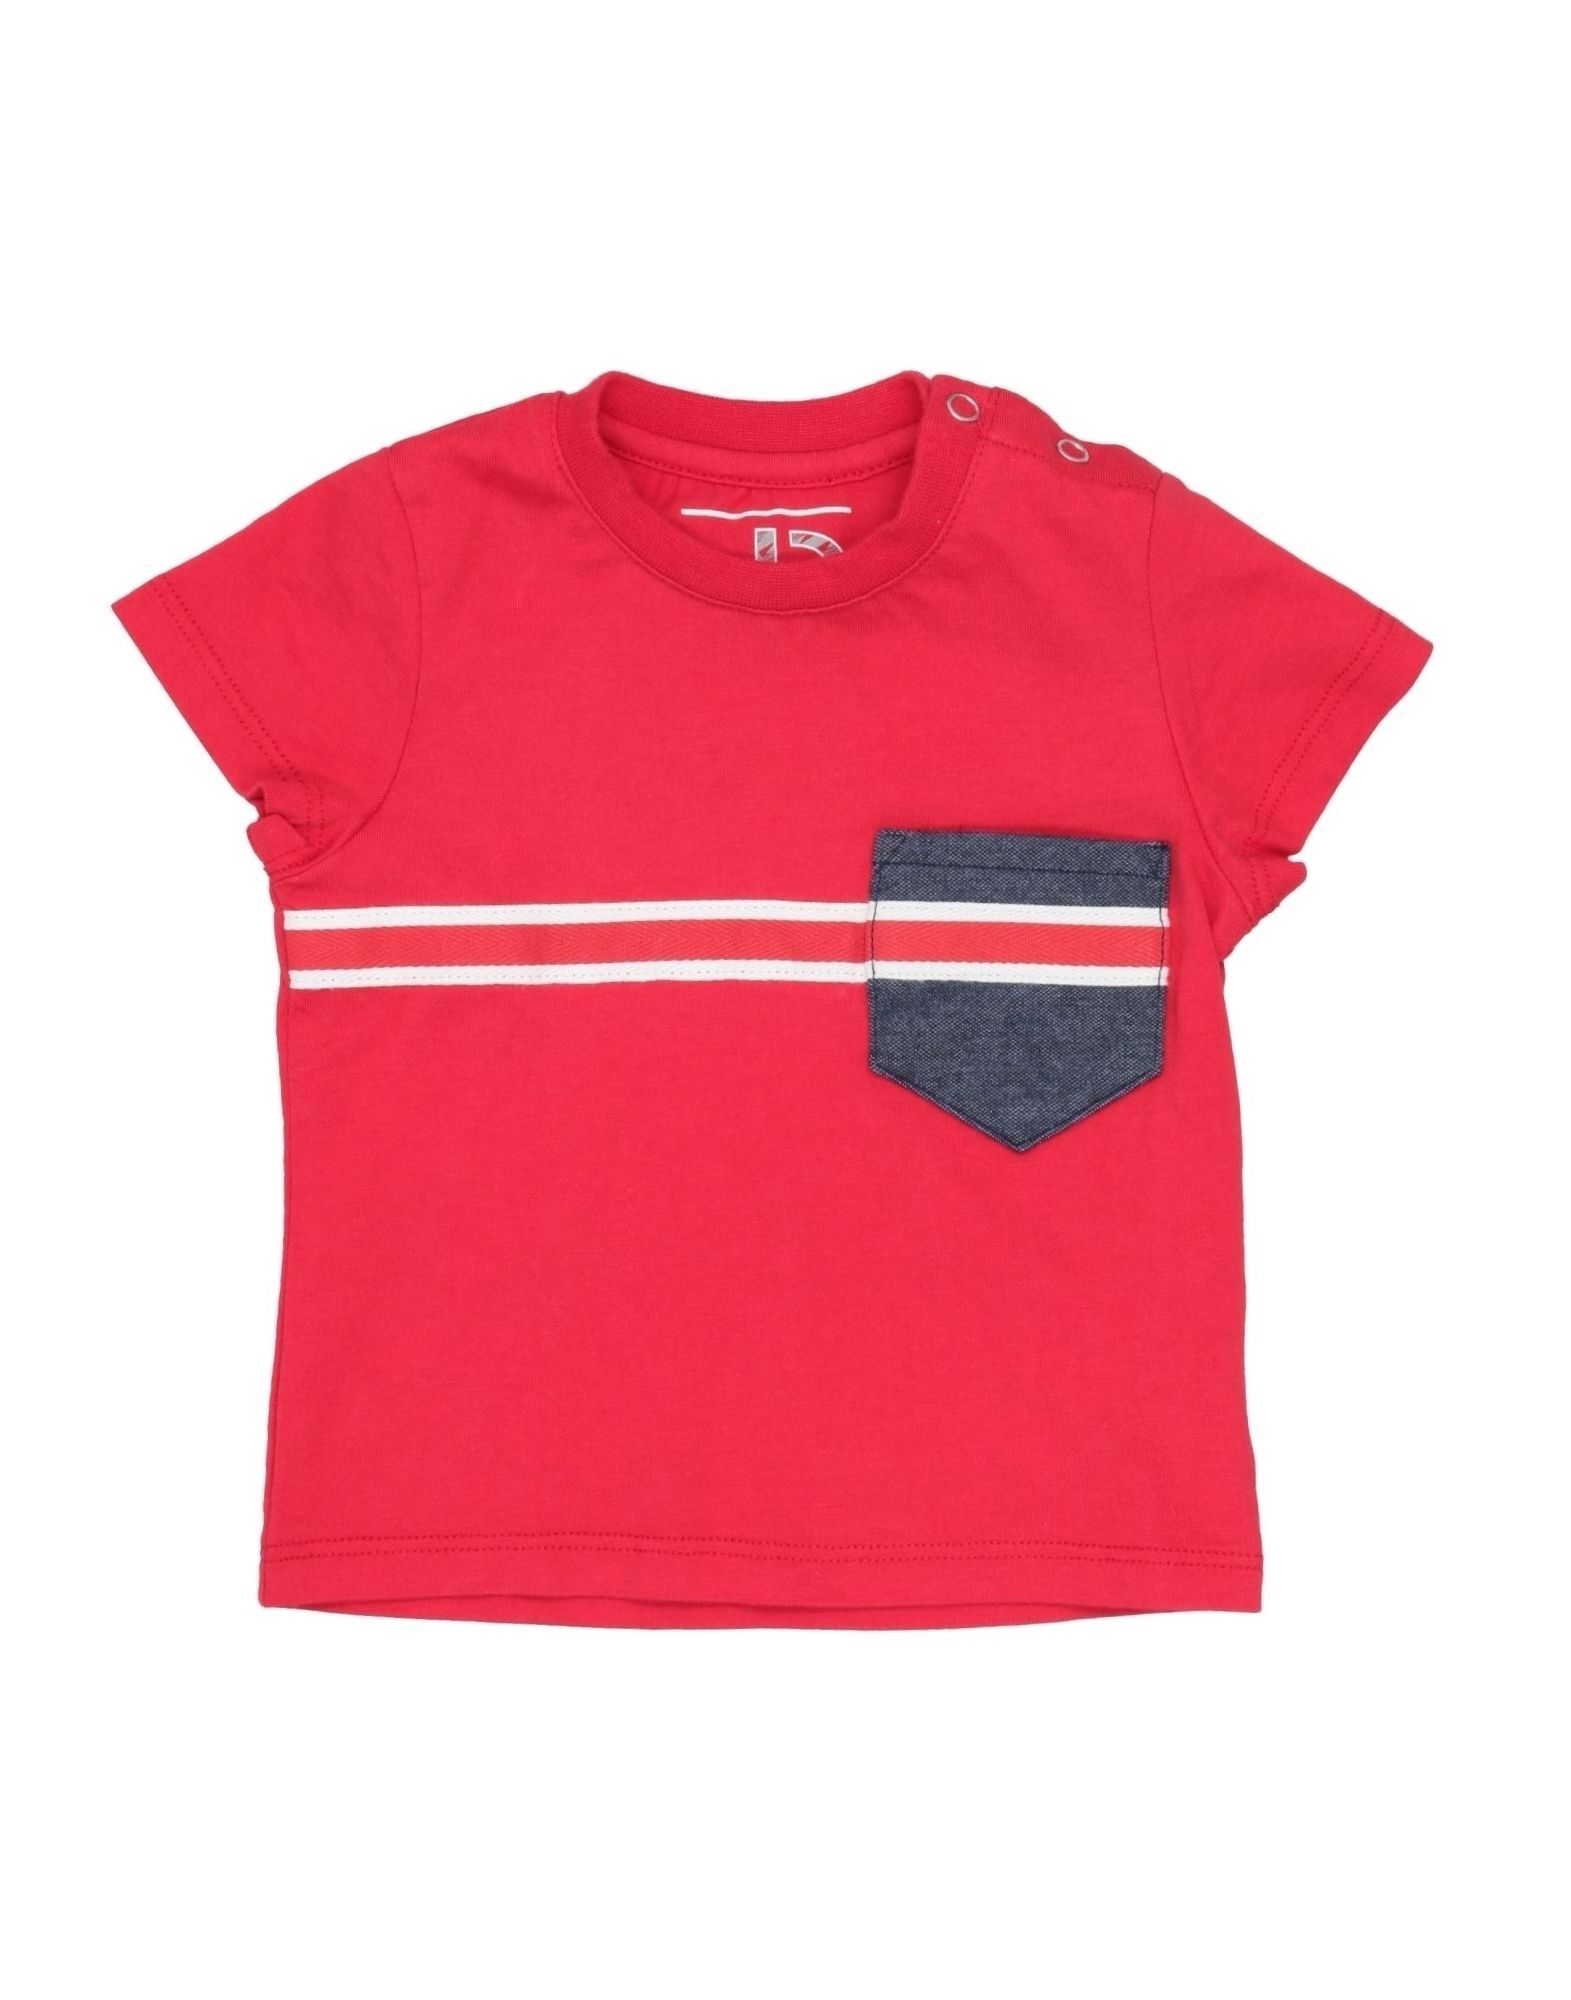 Ronnie Kay Kids' T-shirts In Red